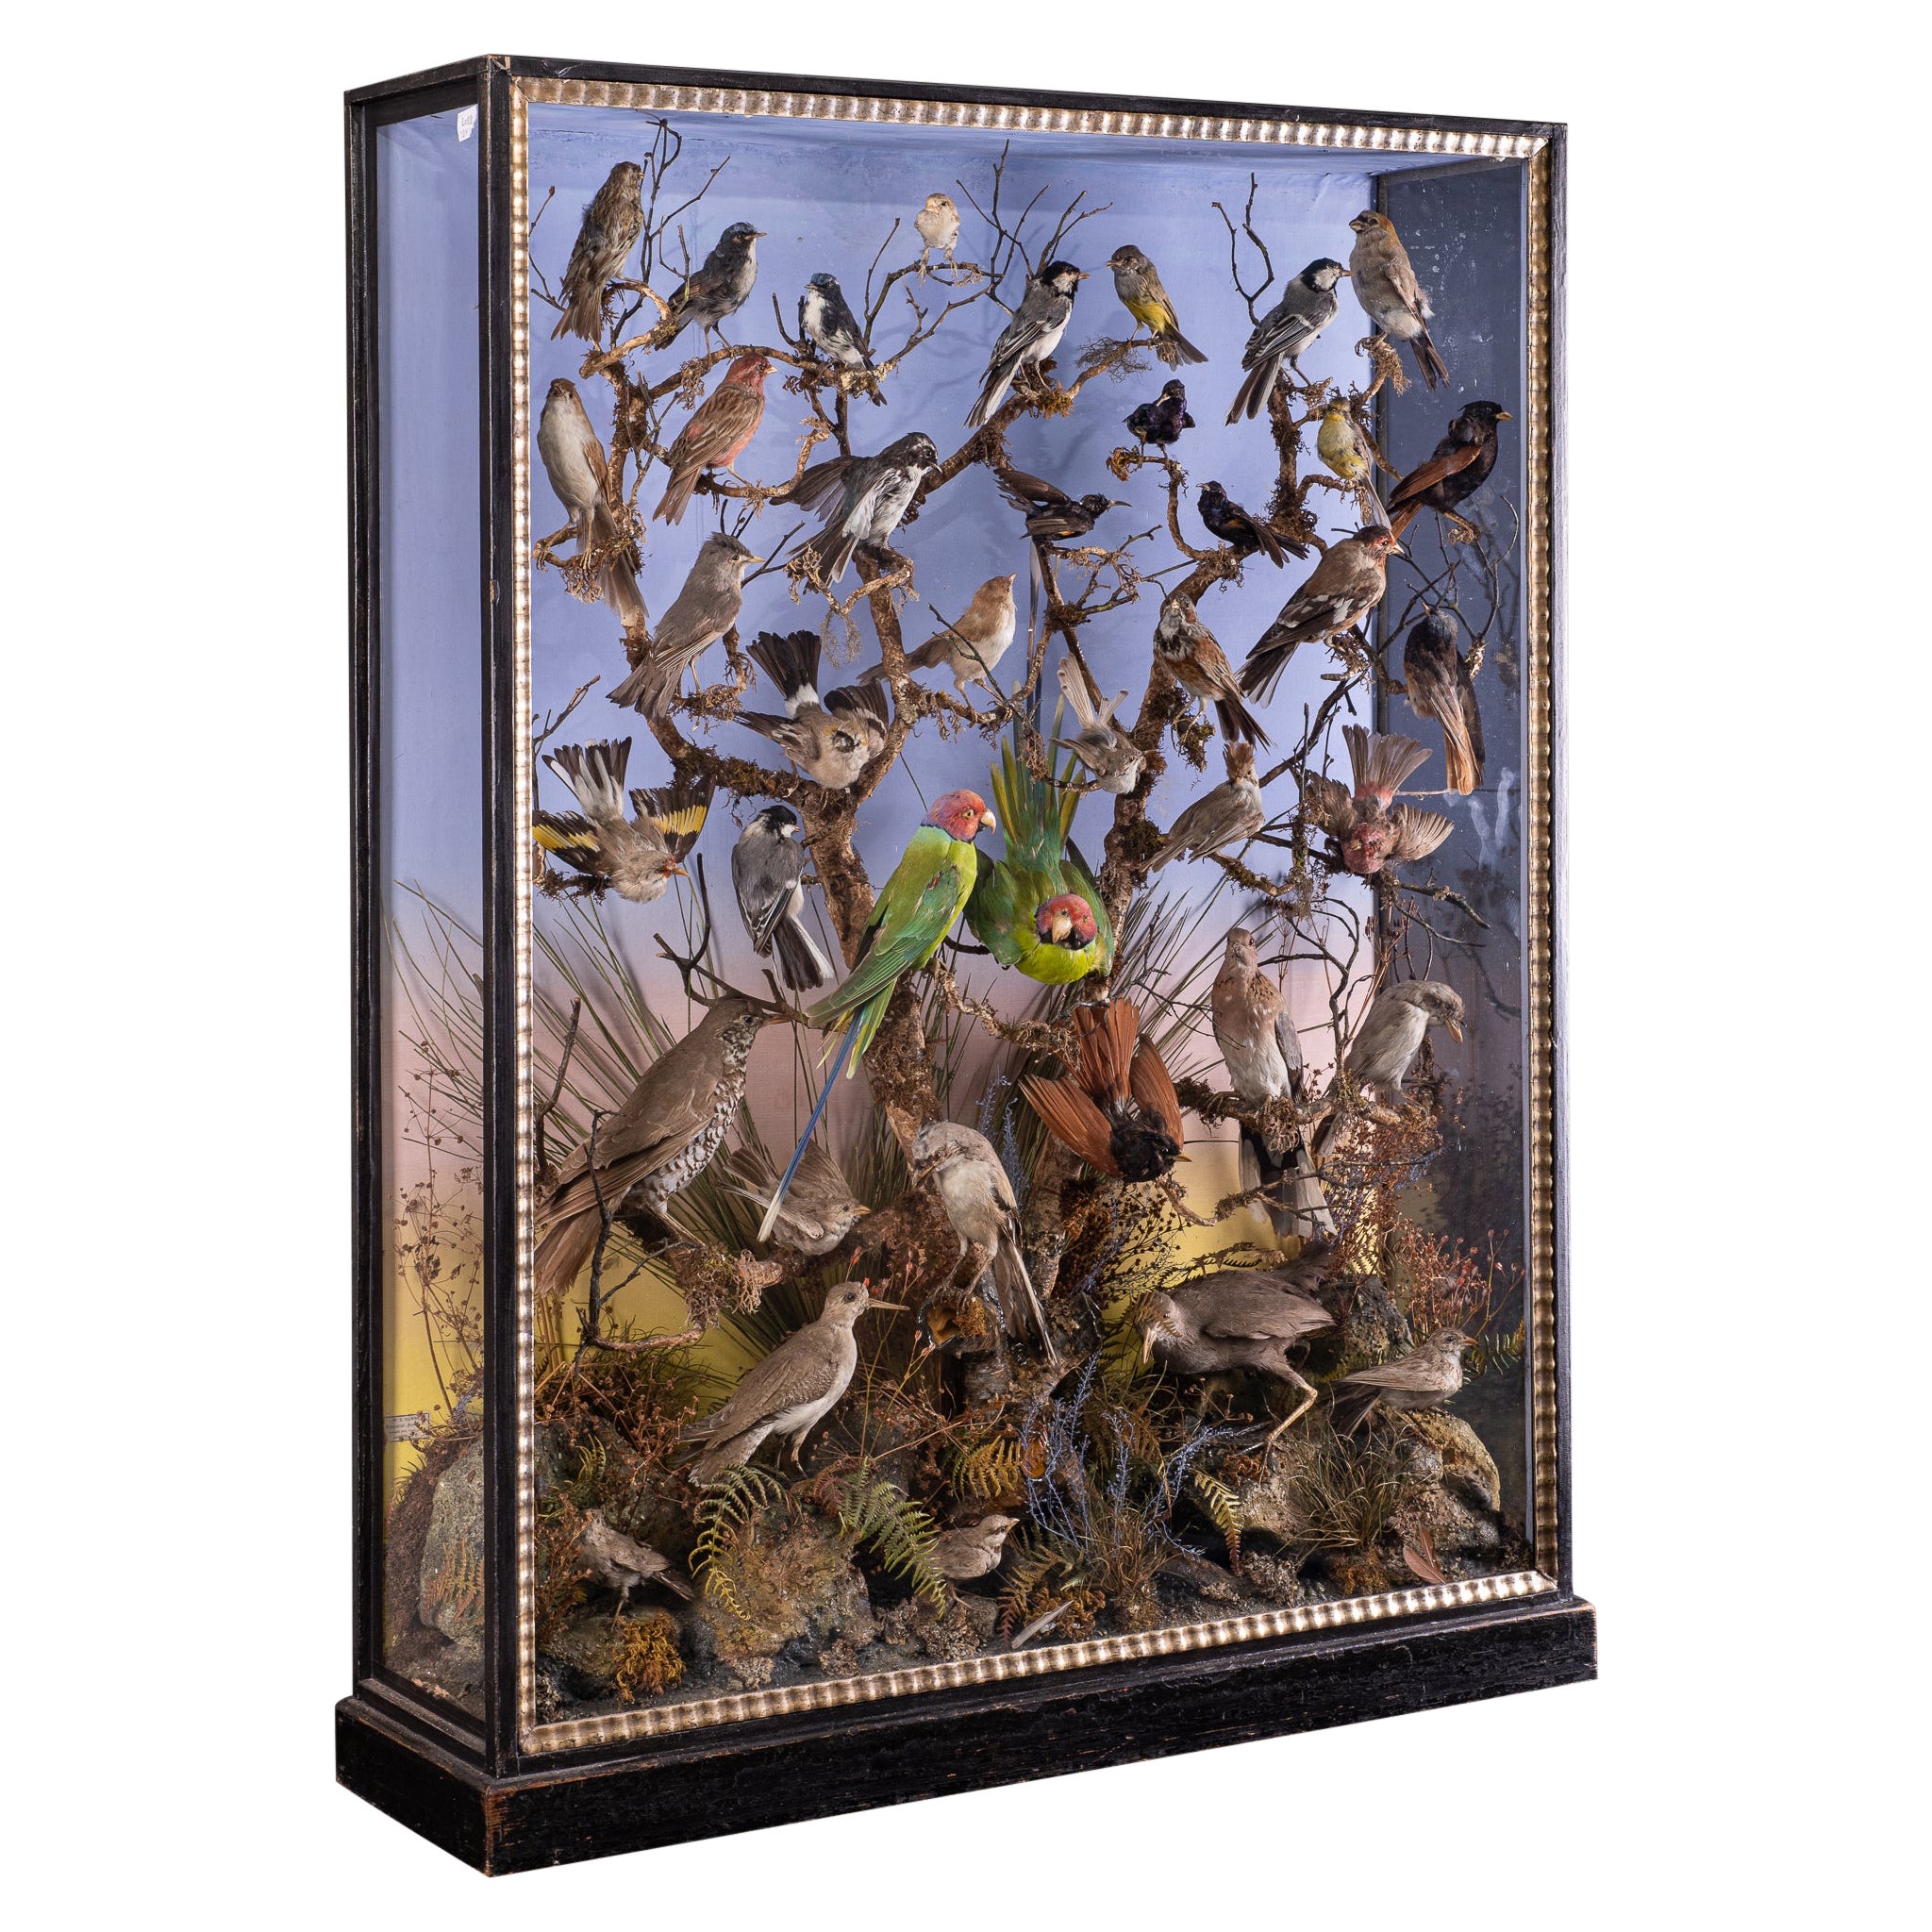 Antique 19th C Victorian Diorama with 40 taxidermy Indian birds by W.D.Dawes For Sale